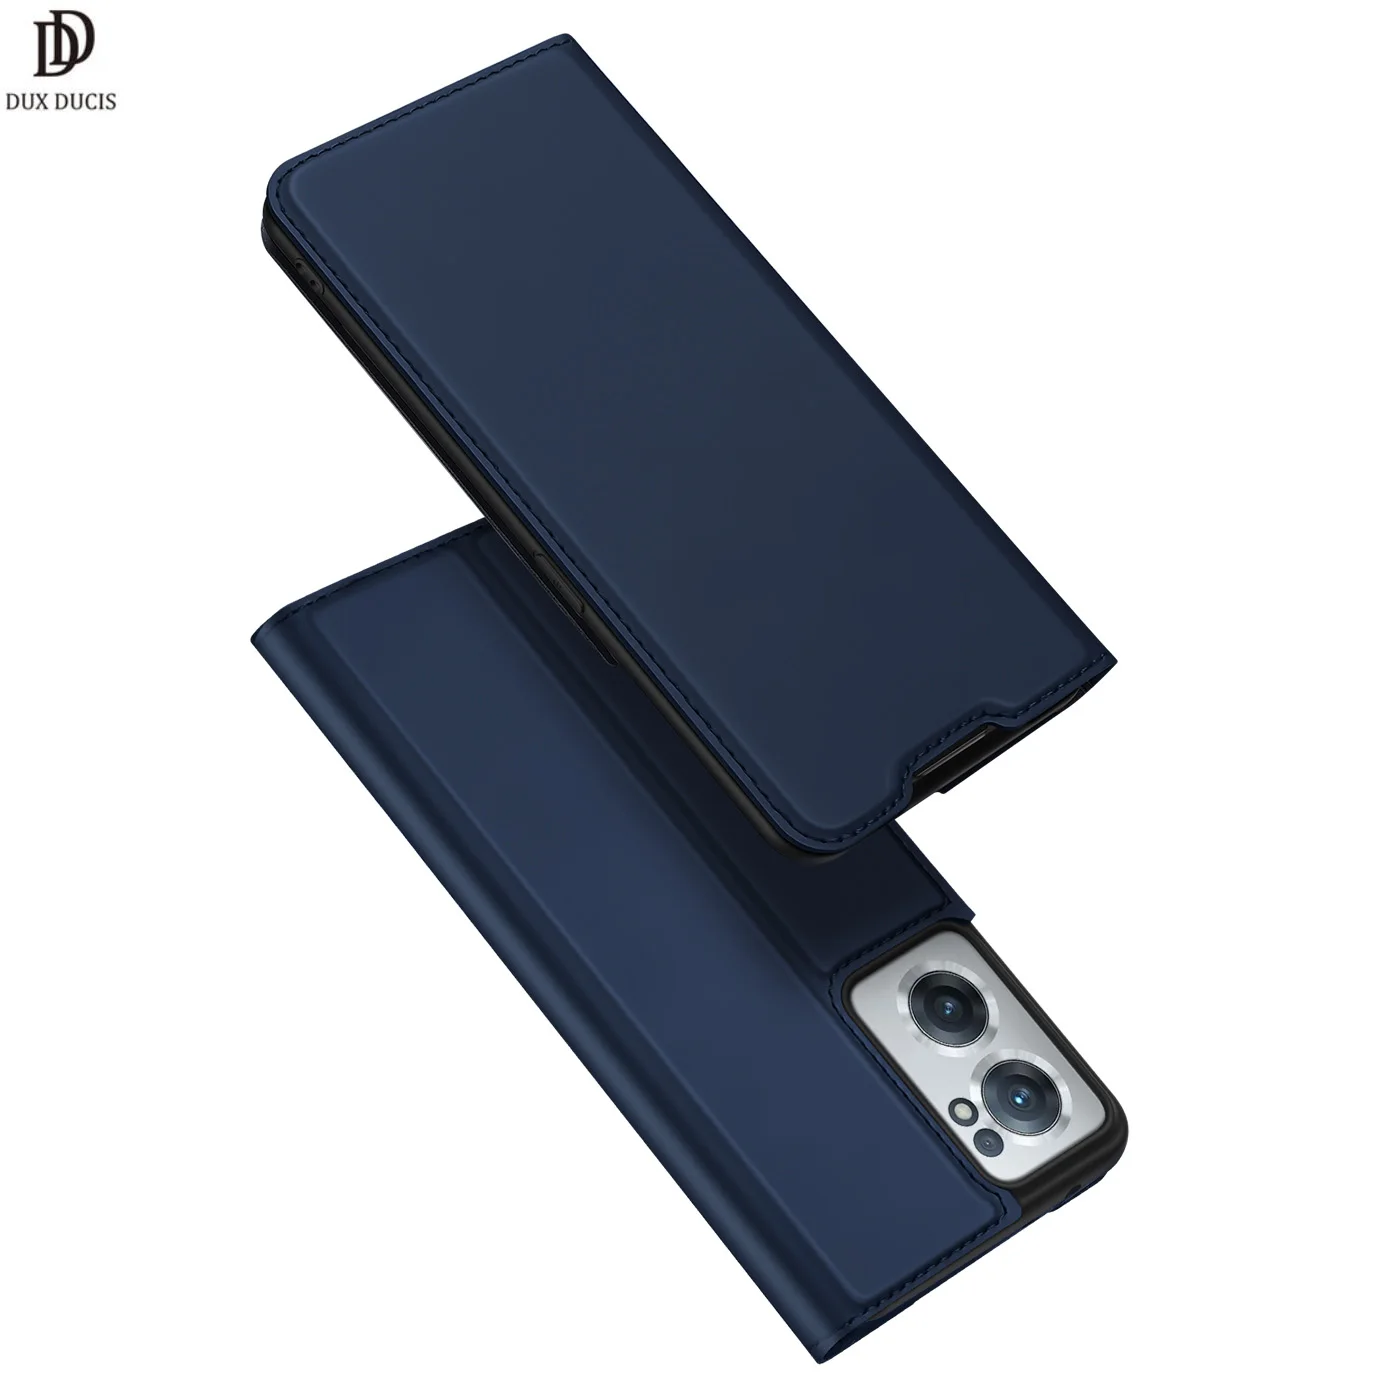 

Case For OnePlus Nord CE 2 5G Leather Wallet Flip Case Full Protection Steady Stand Magnetic Closure DUX DUCIS Skin Pro Series